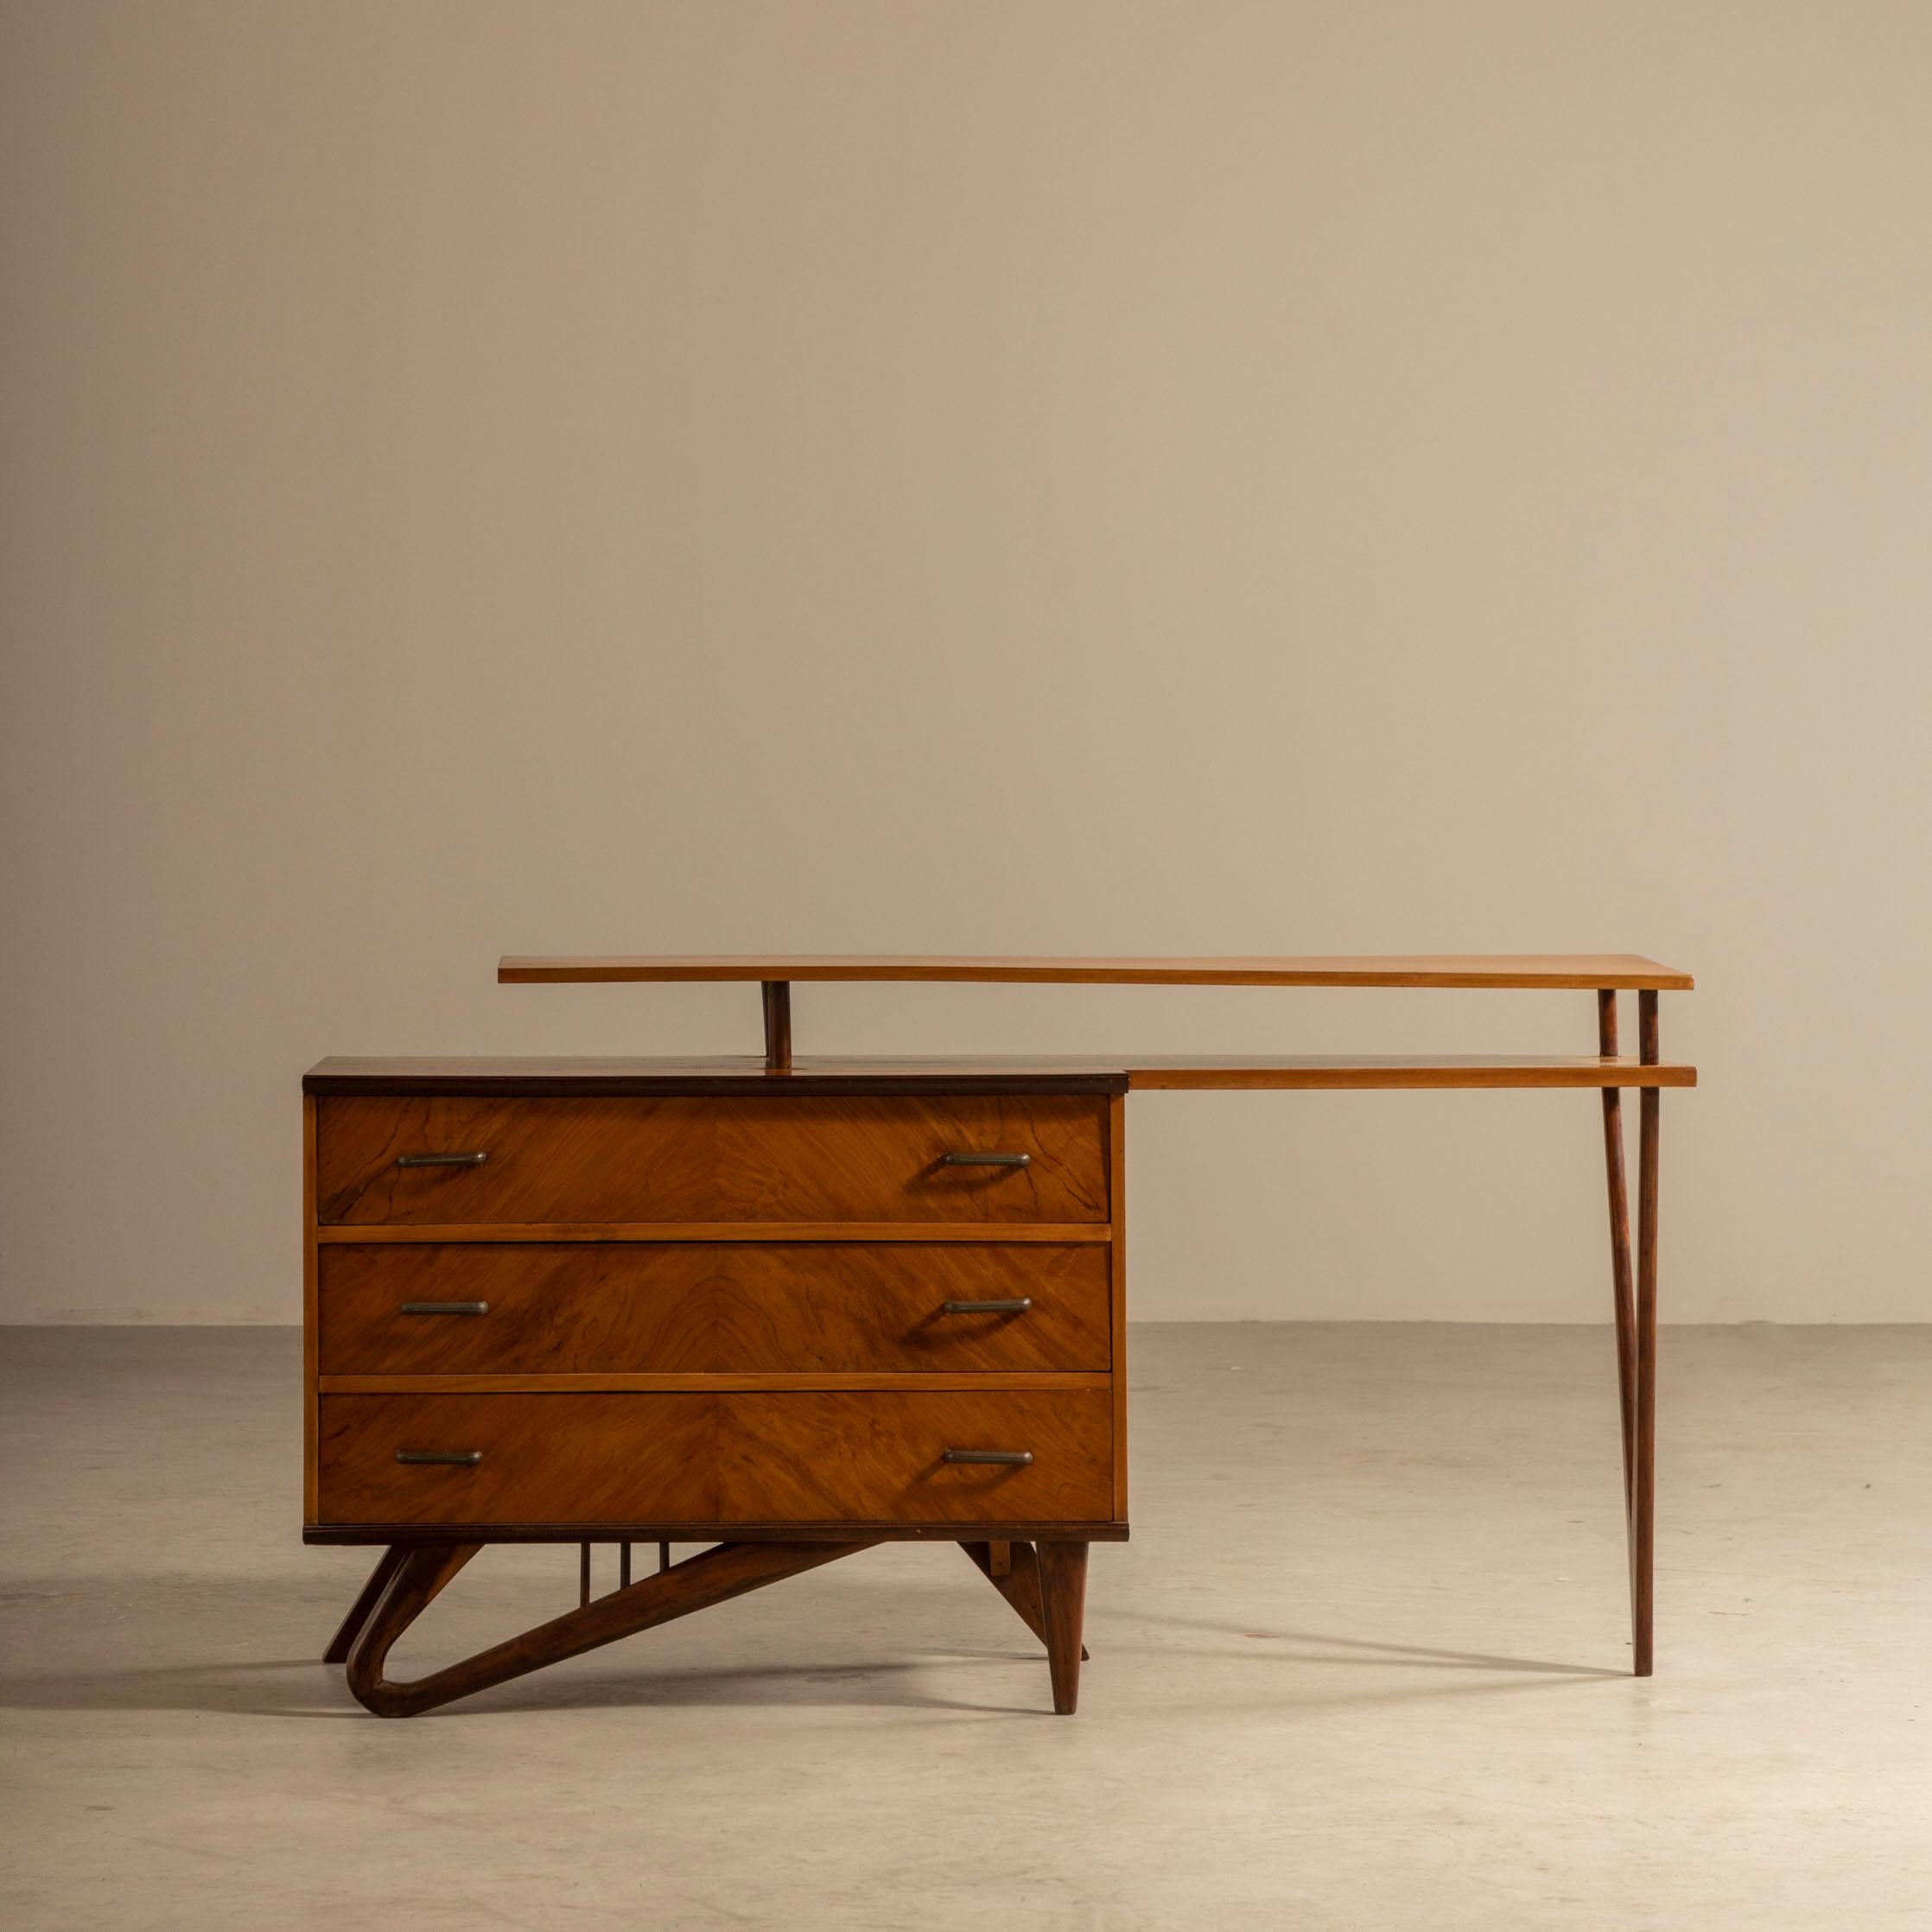 Giuseppe Scapinelli was a Brazilian designer born in Italy in 1908. He was recognized for his unique and innovative designs, which incorporated both traditional and modern elements. One of his notable designs is a small sideboard made in caviuna